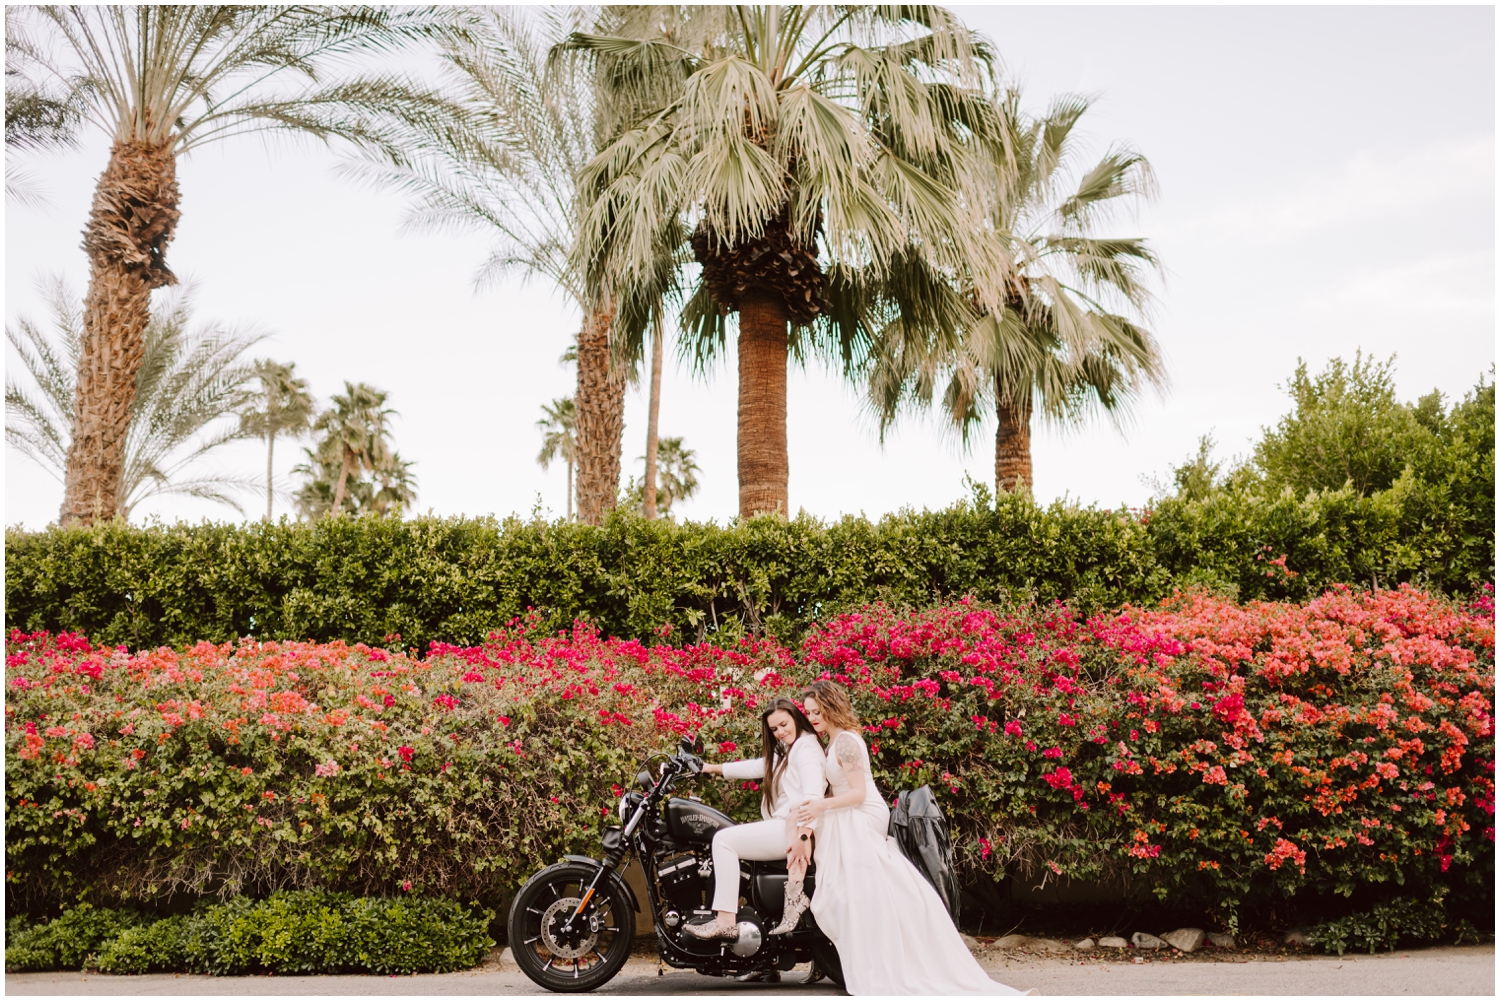 creative downtown palm springs elopement portraits with blooming begonias and motorcycle